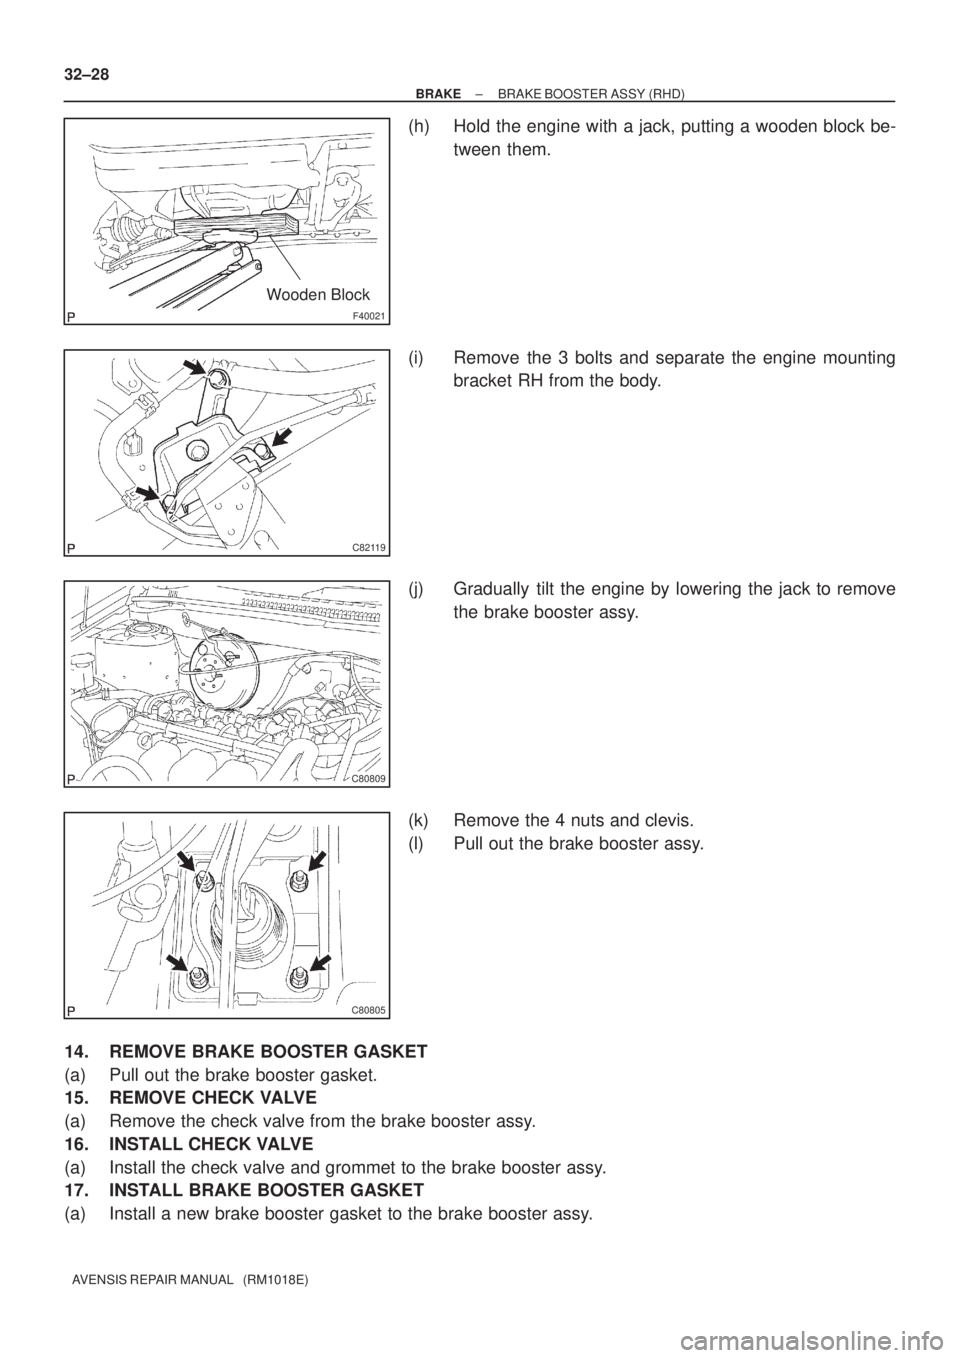 TOYOTA AVENSIS 2002  Repair Manual F40021
Wooden Block
C82119
C80809
C80805
32±28
± BRAKEBRAKE BOOSTER ASSY (RHD)
AVENSIS REPAIR MANUAL   (RM1018E)
(h) Hold the engine with a jack, putting a wooden block be-
tween them.
(i) Remove th